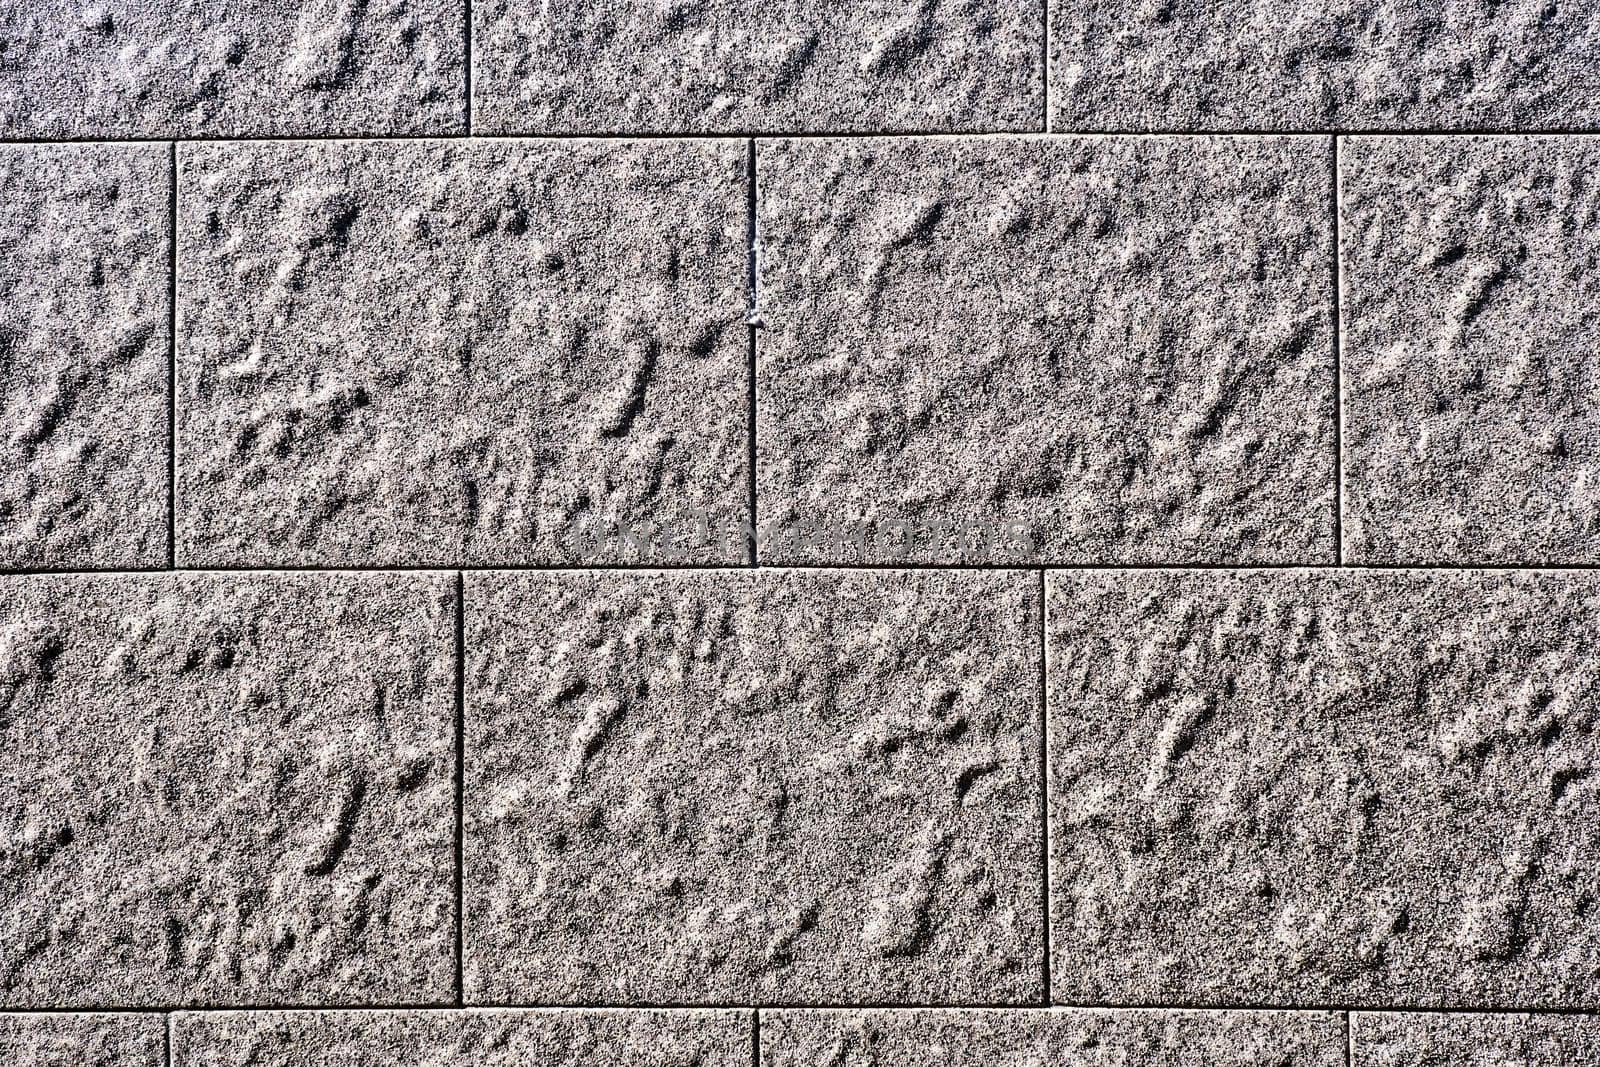 Background from a wall with rectangular grey stone slabs